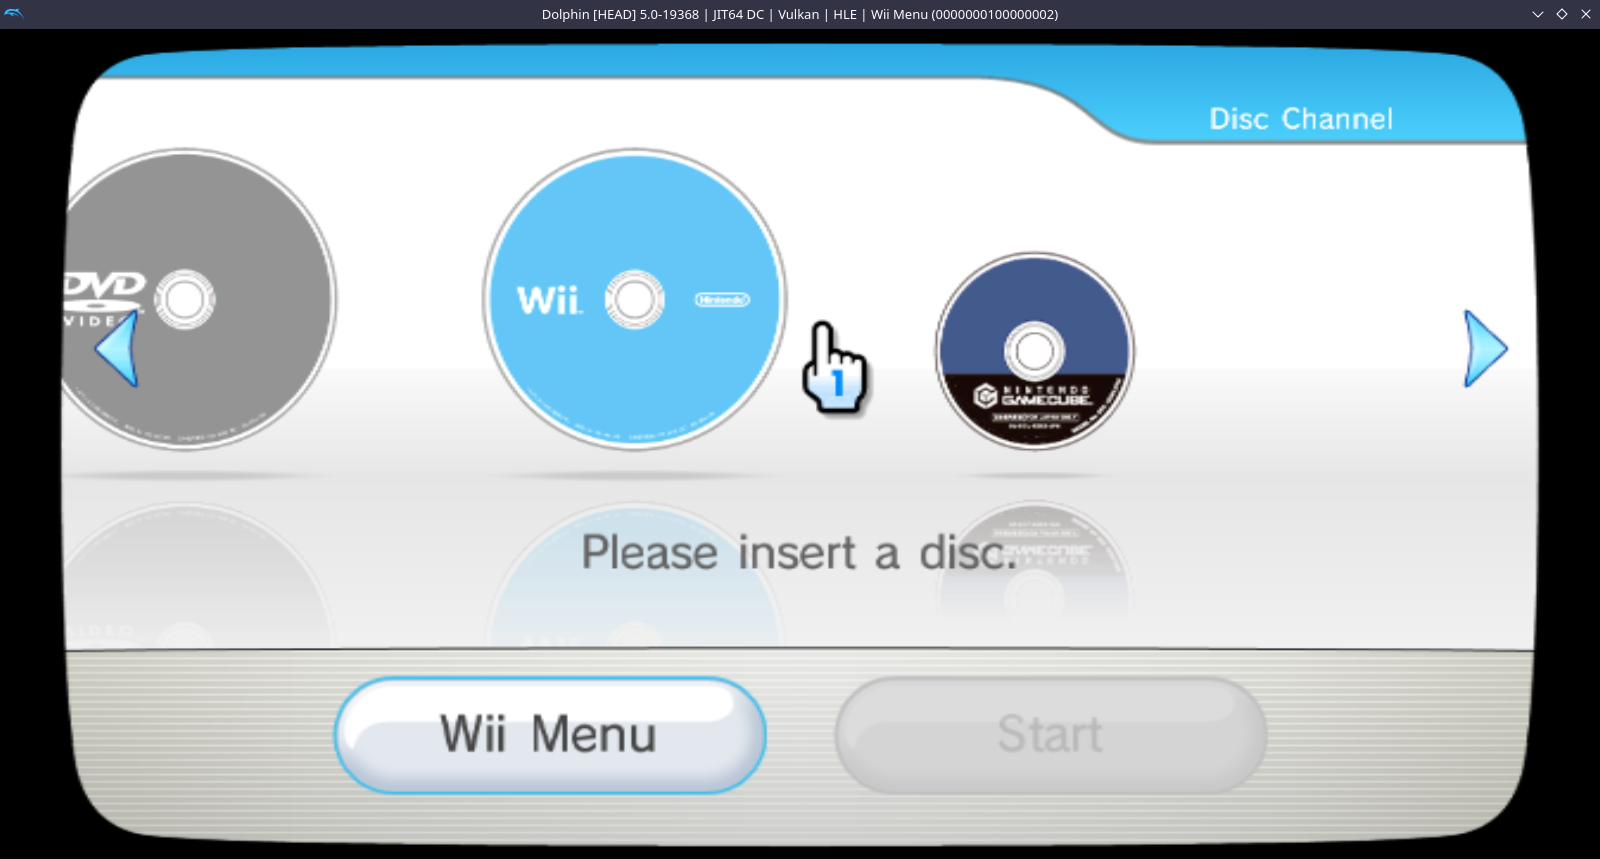 A screenshot of the Disc Channel in Dolphin with the DVD icon shown, now with the missing shadow and reflection.